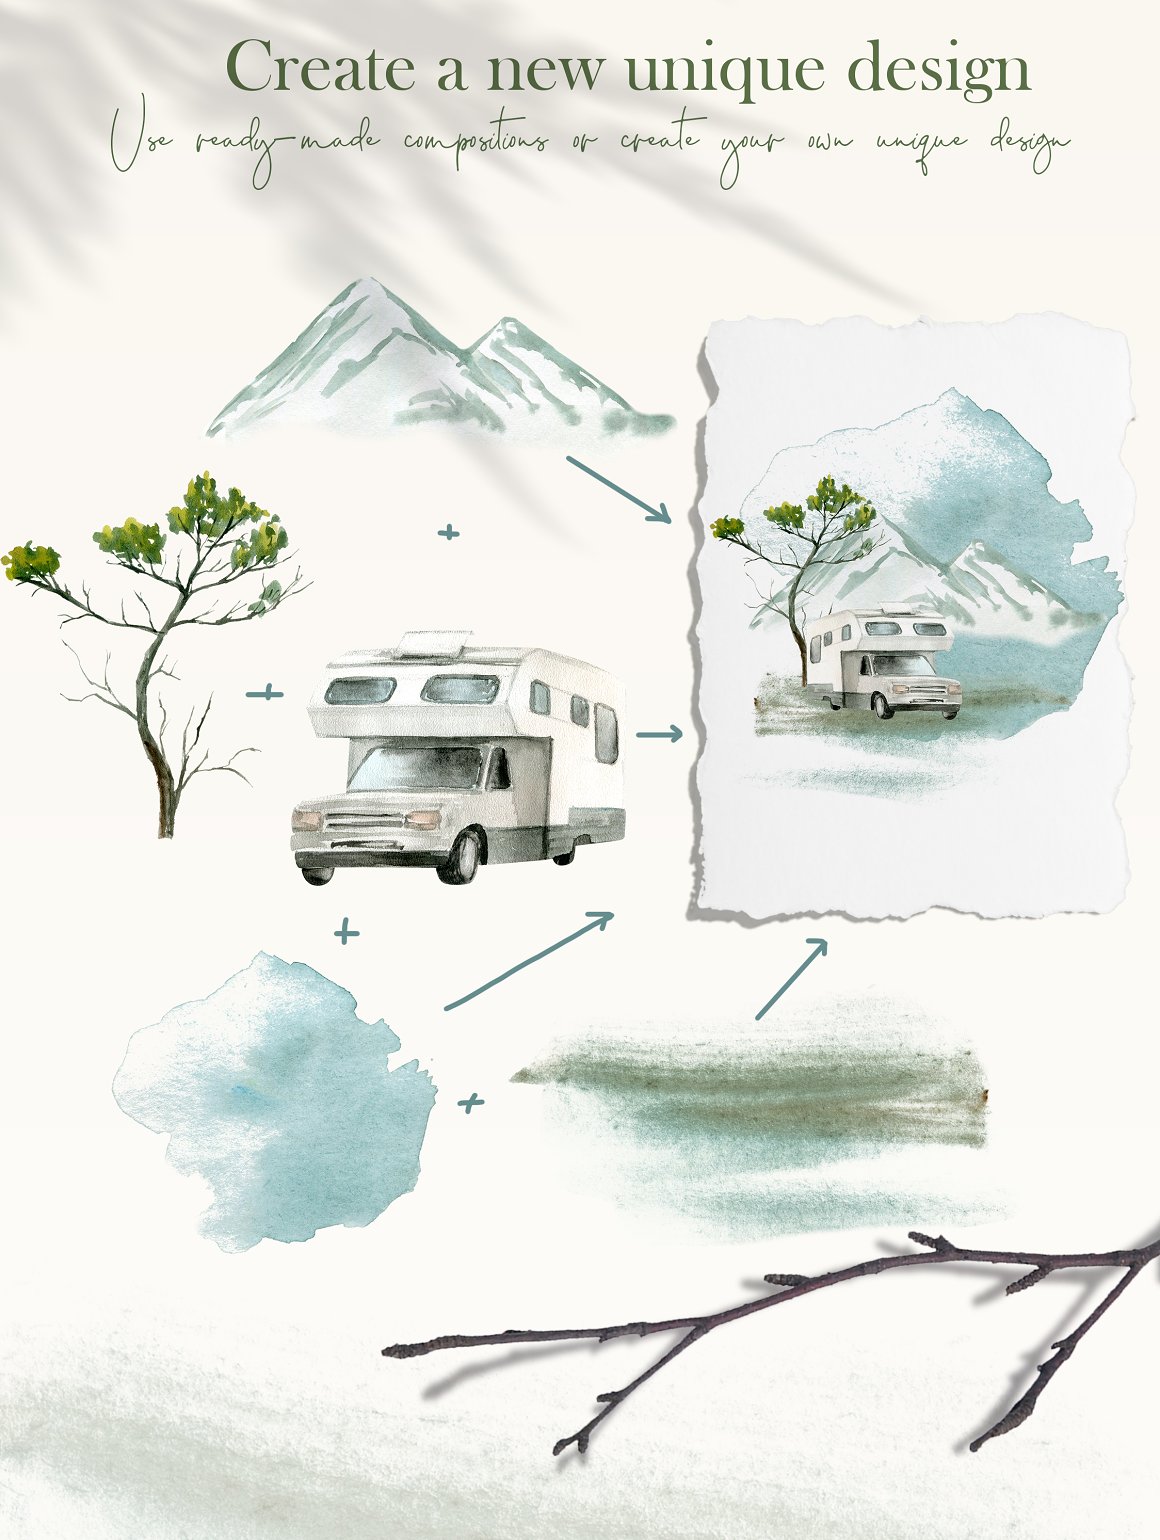 Motorhome and mountains image.